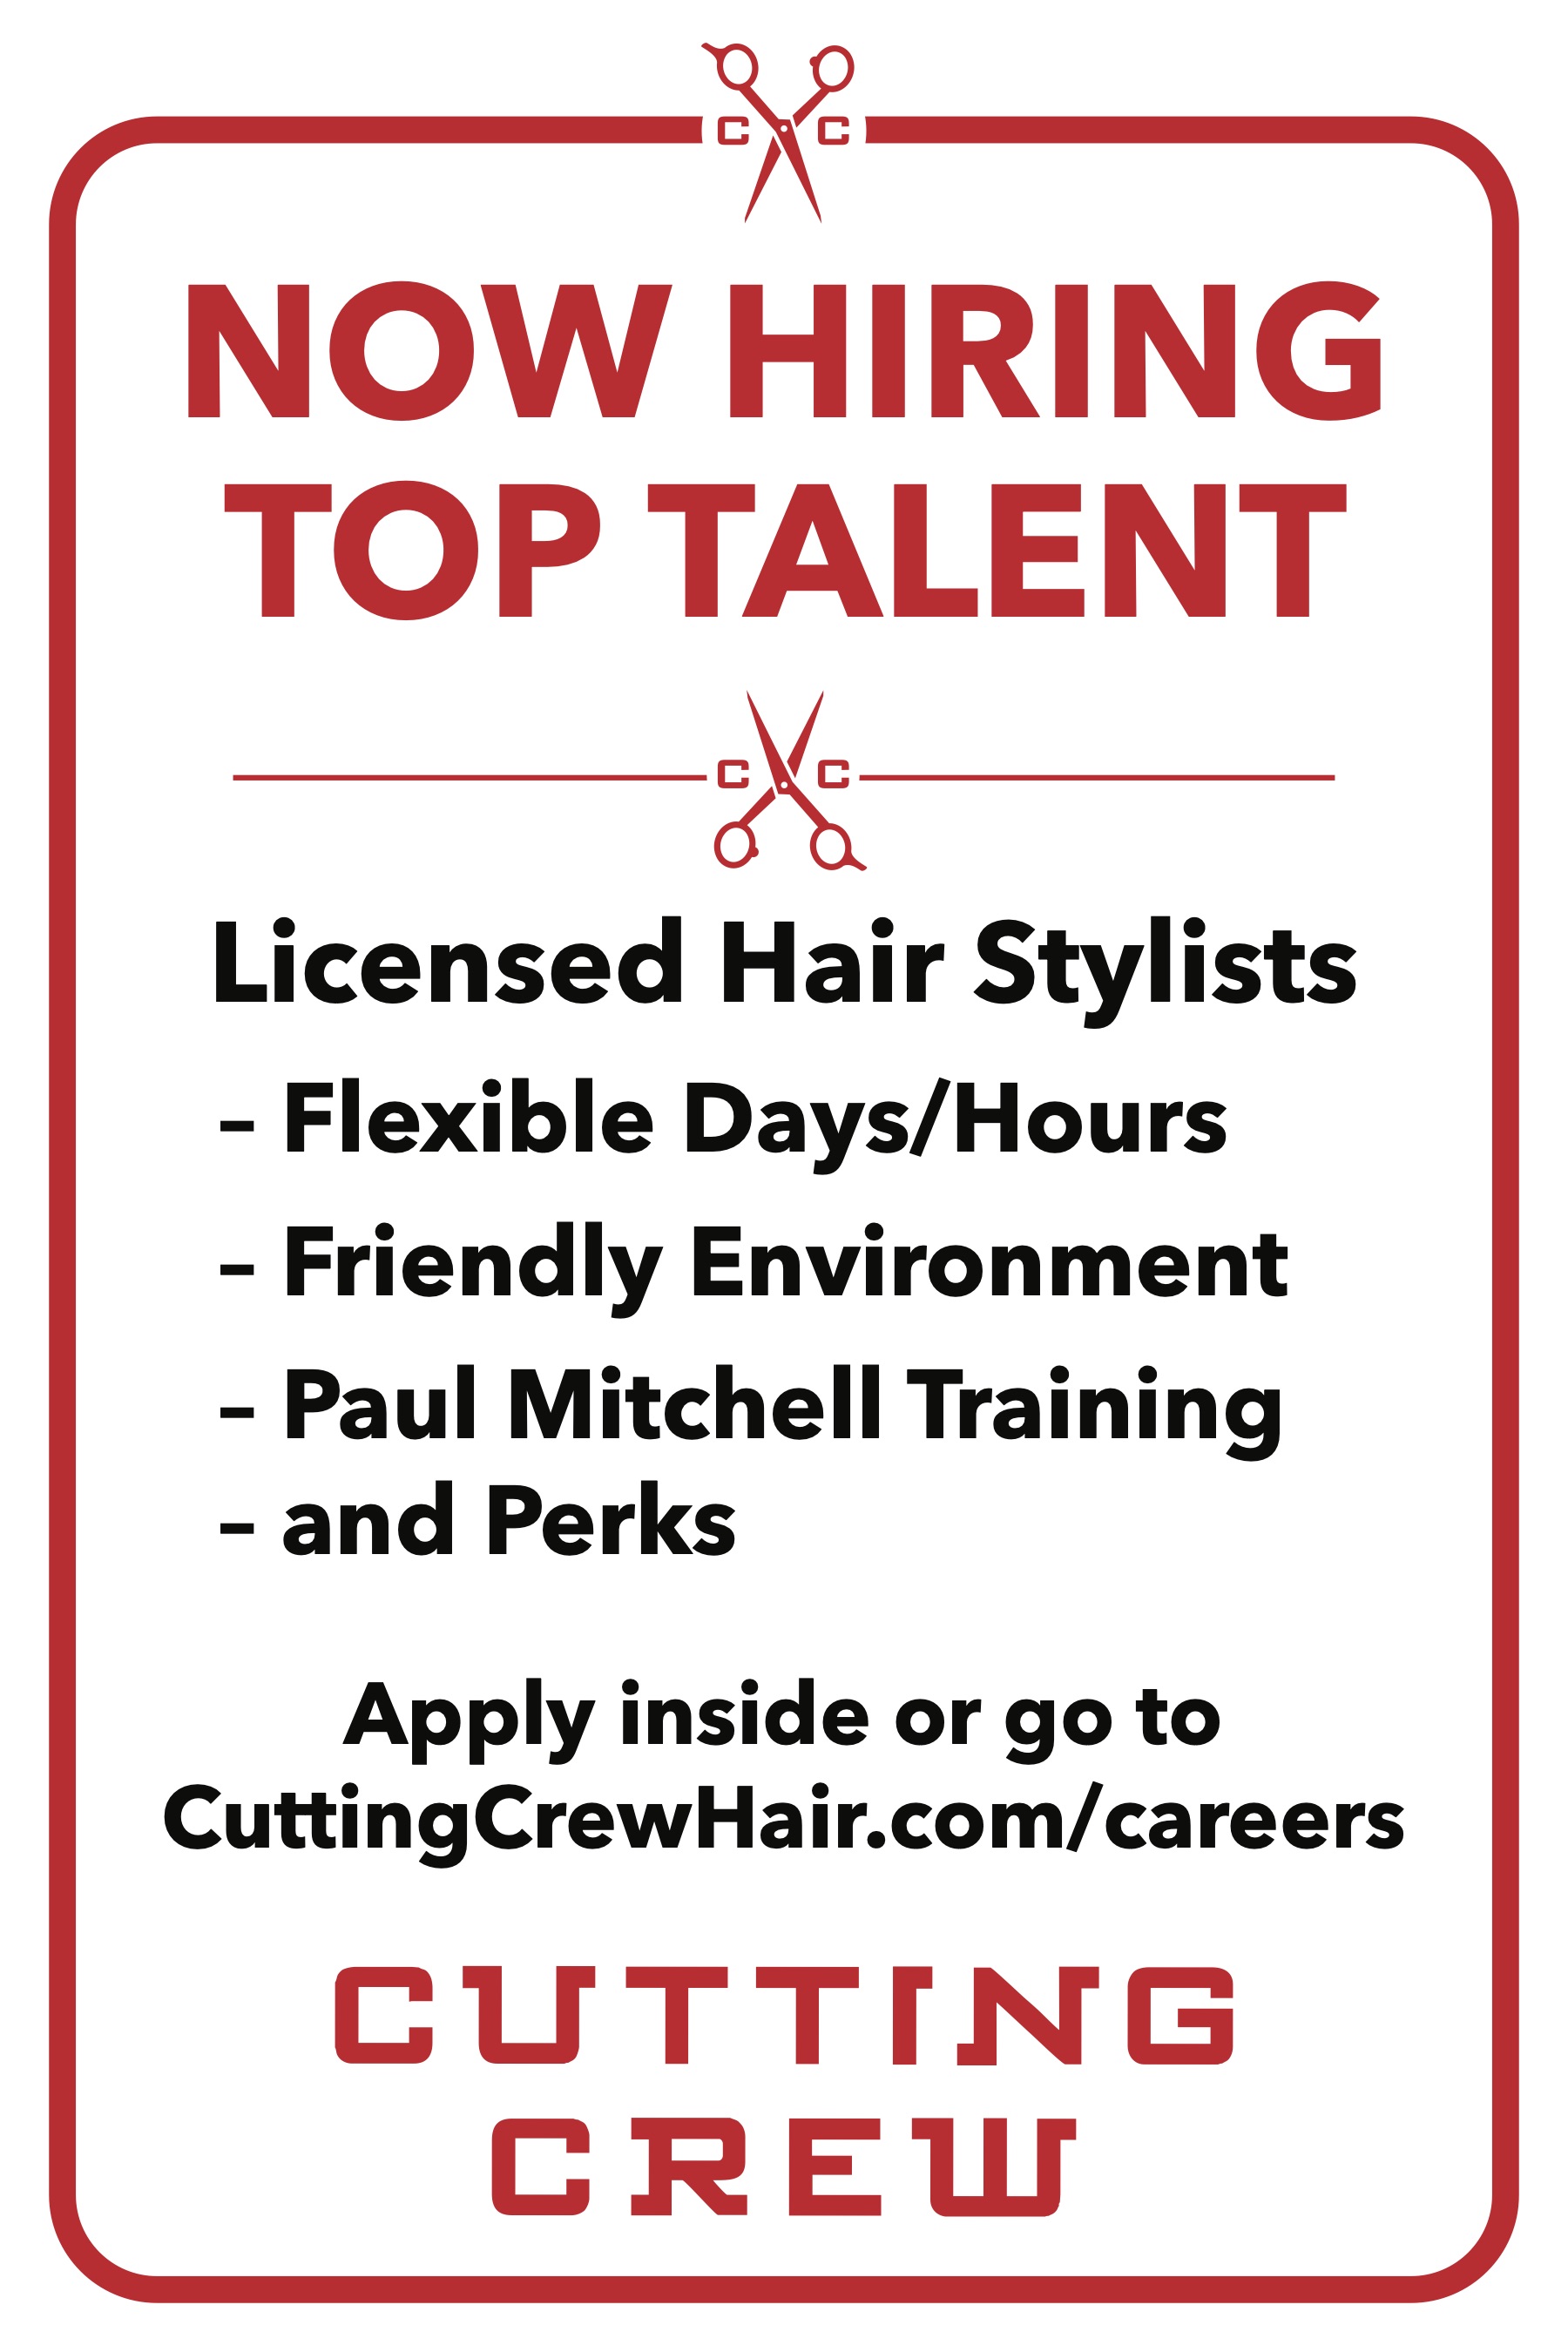 Jump start your career today with the Cutting Crew Hair Salon team and our current employment opportunities in Naugatuck.